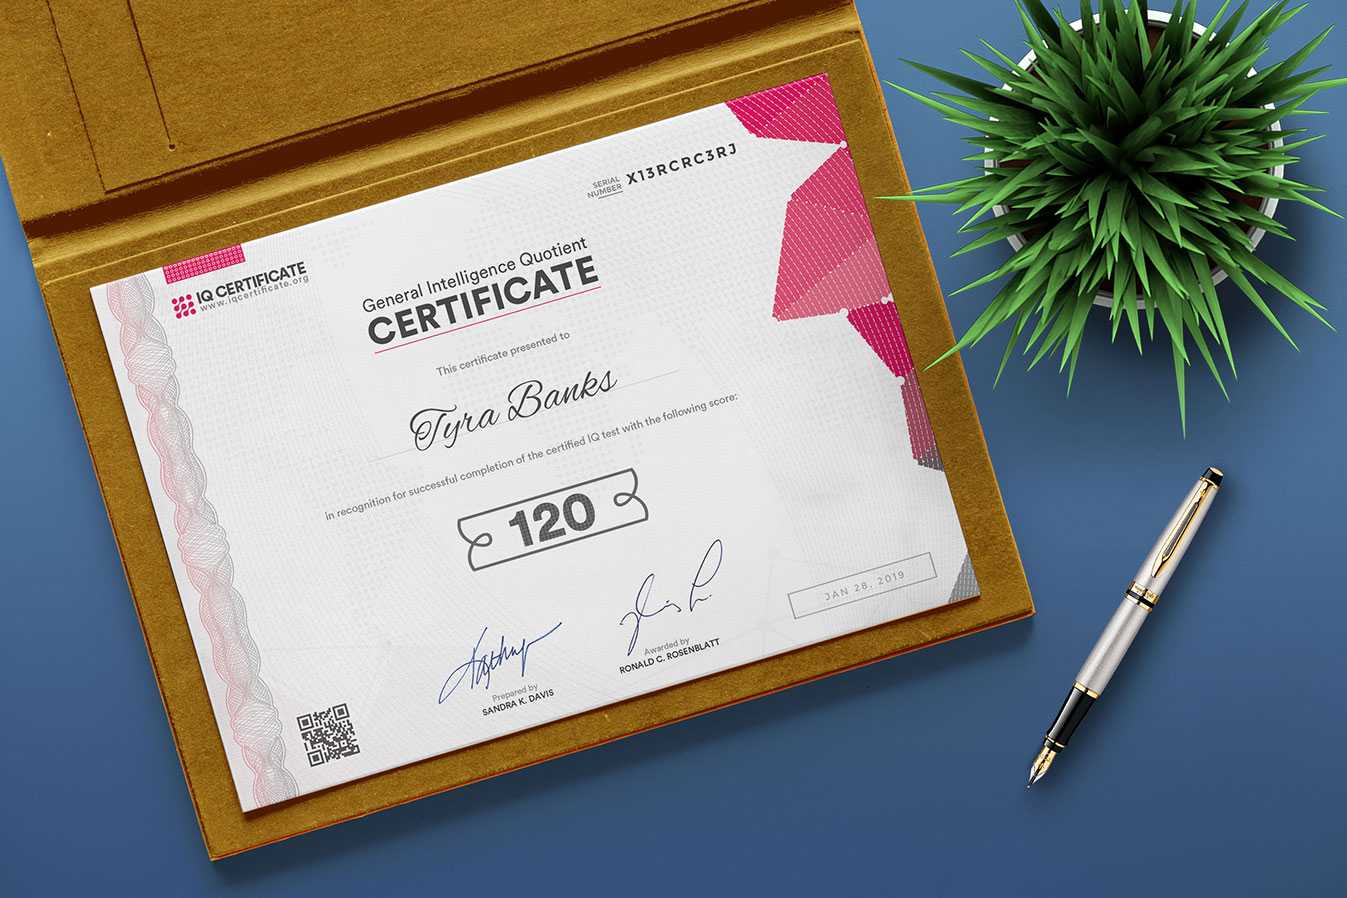 Sample Iq Certificate - Get Your Iq Certificate! Intended For Iq Certificate Template